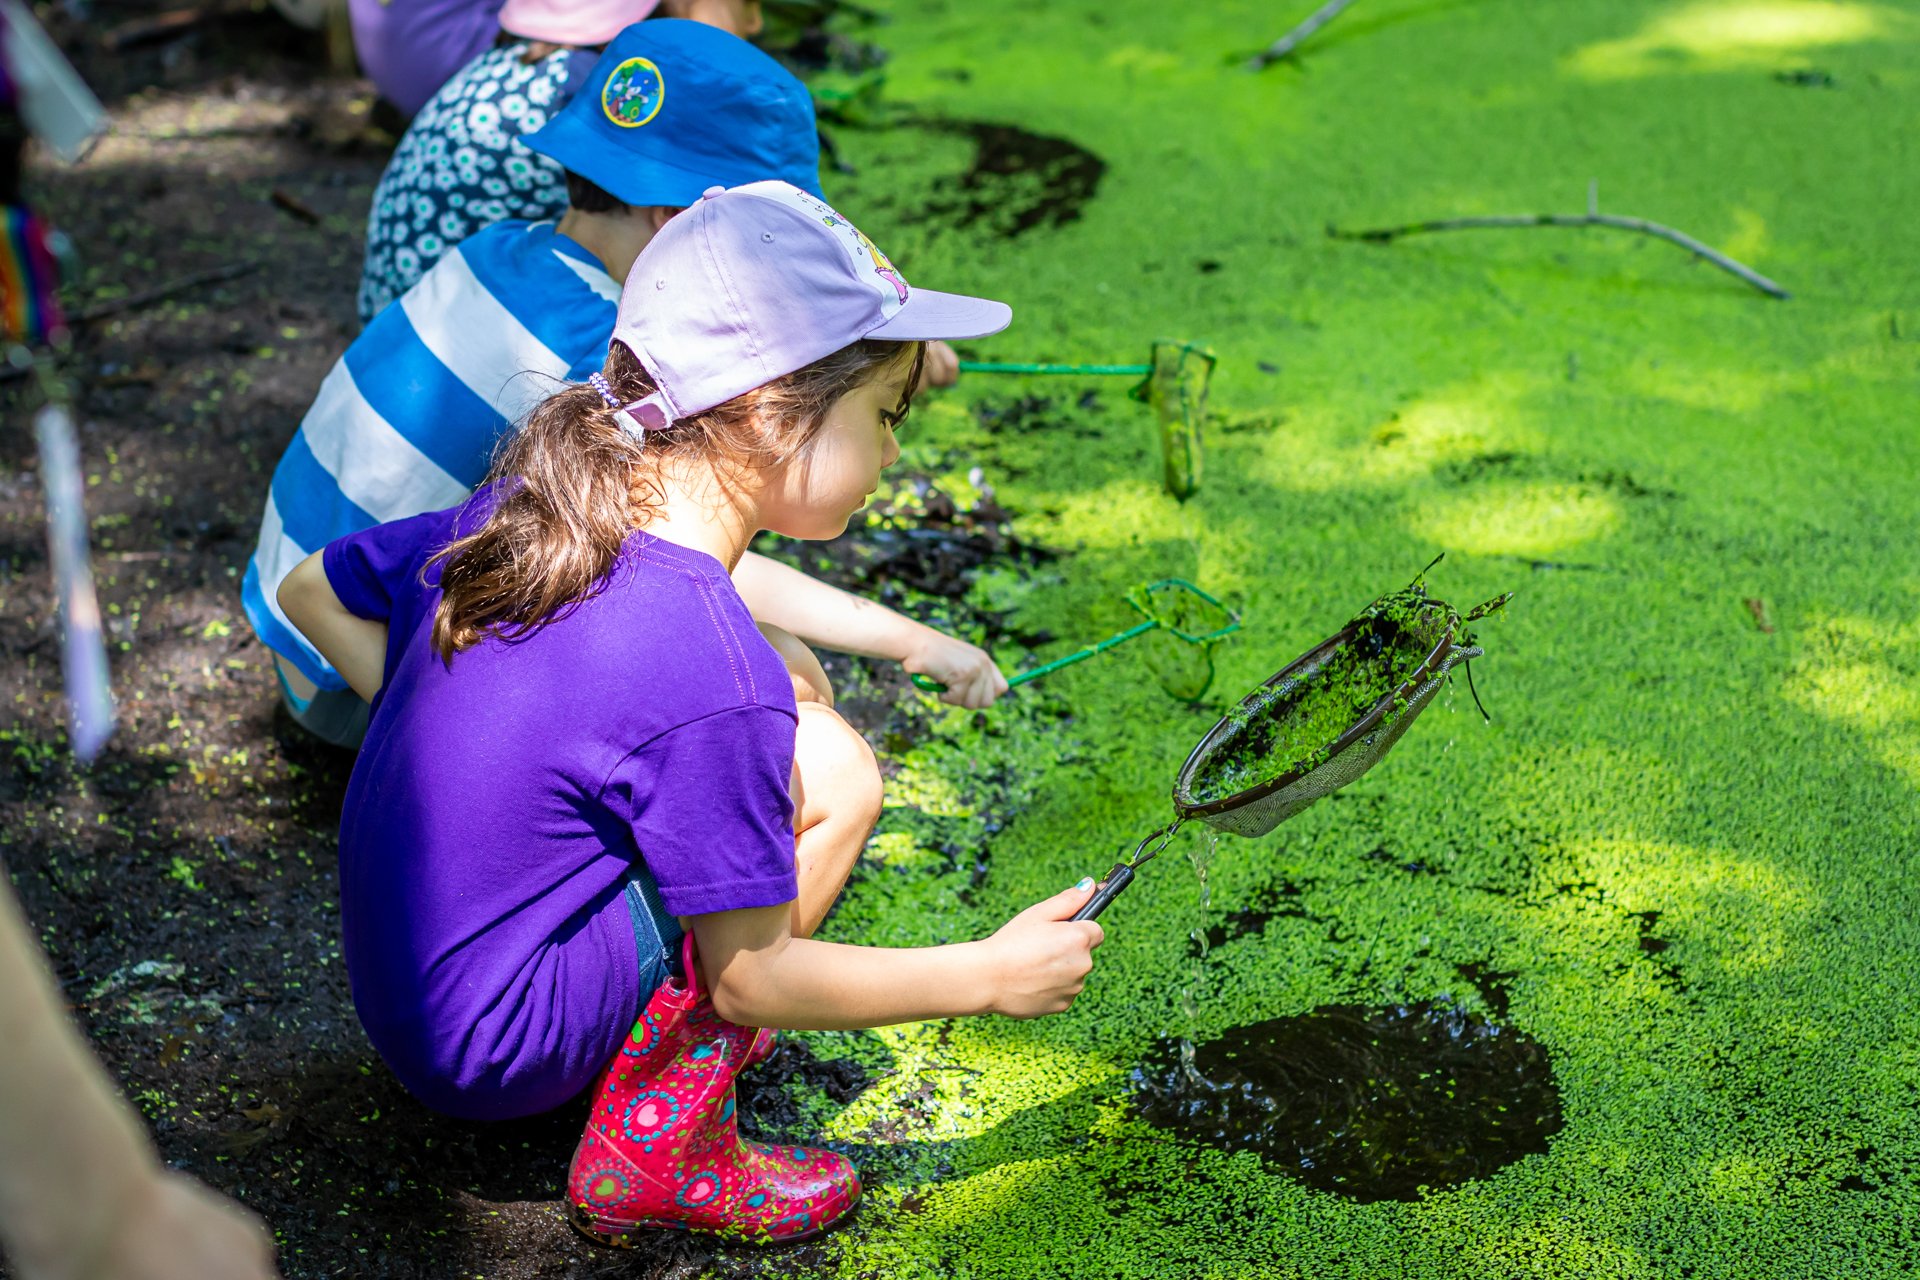 Campers at Arcadia Nature Camp crouching beside water that is thick with duckweed, using dip nets and strainers to look for aquatic wildlife